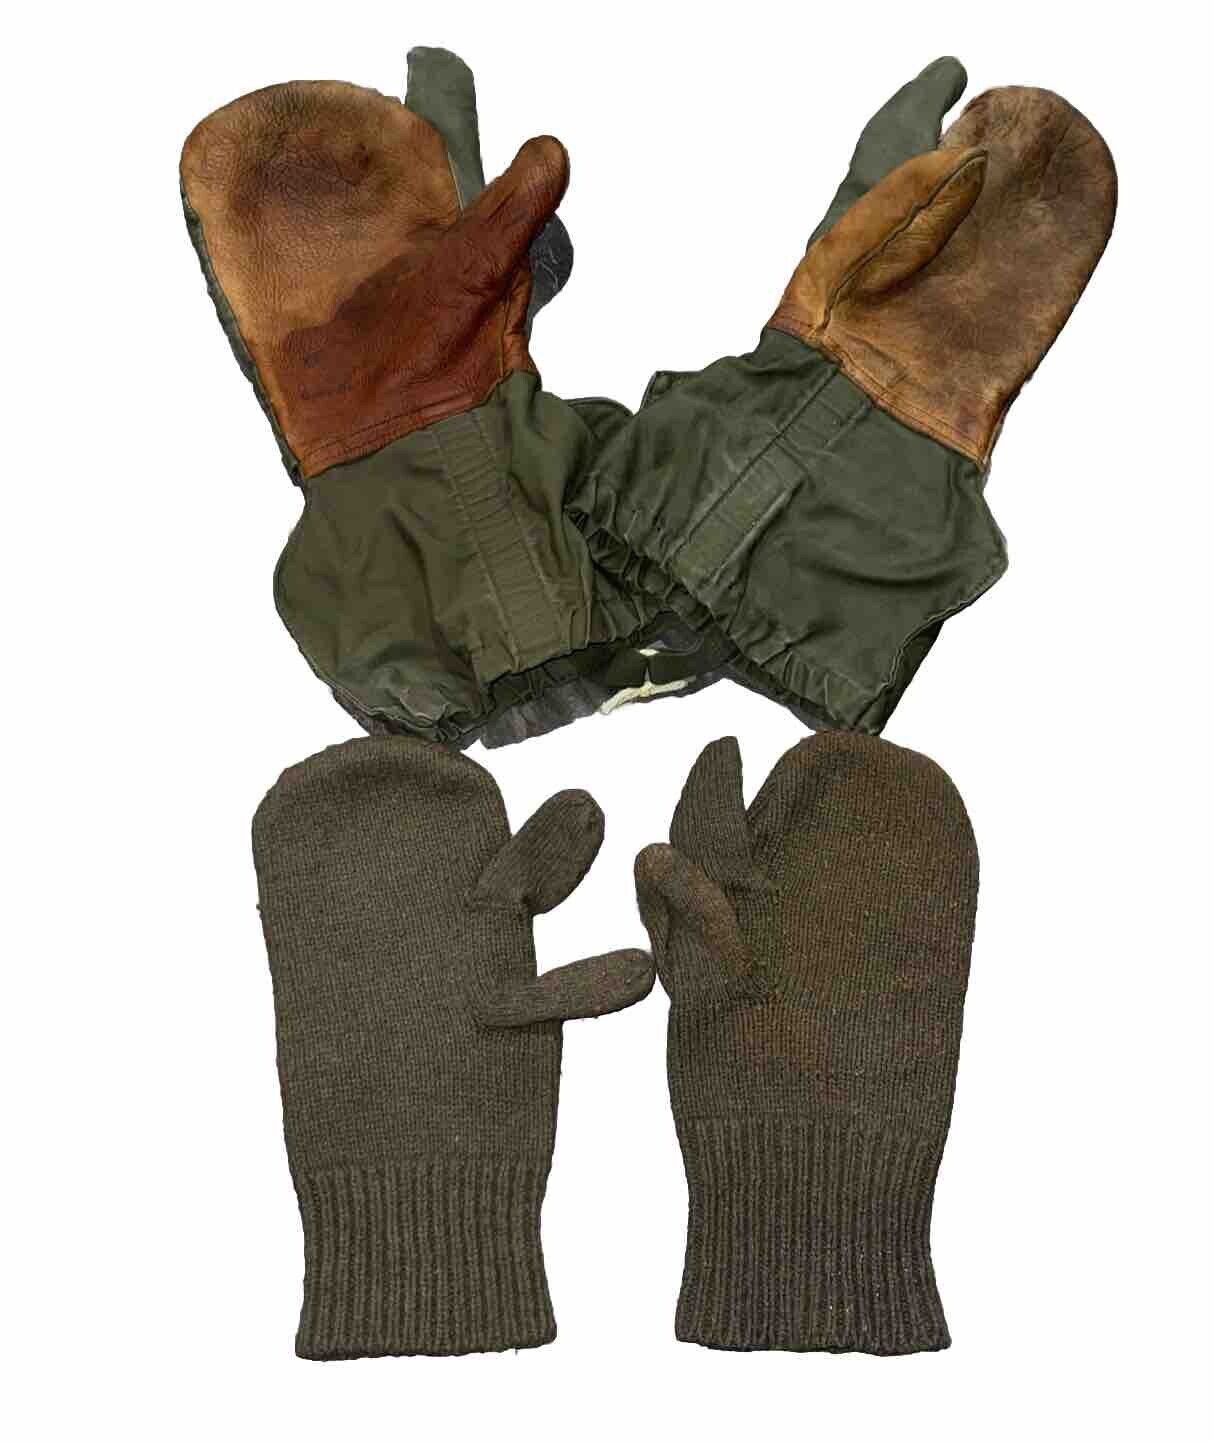 VTG US Army Military Sniper Leather Trigger Finger Shooting Gloves Wool Mittens